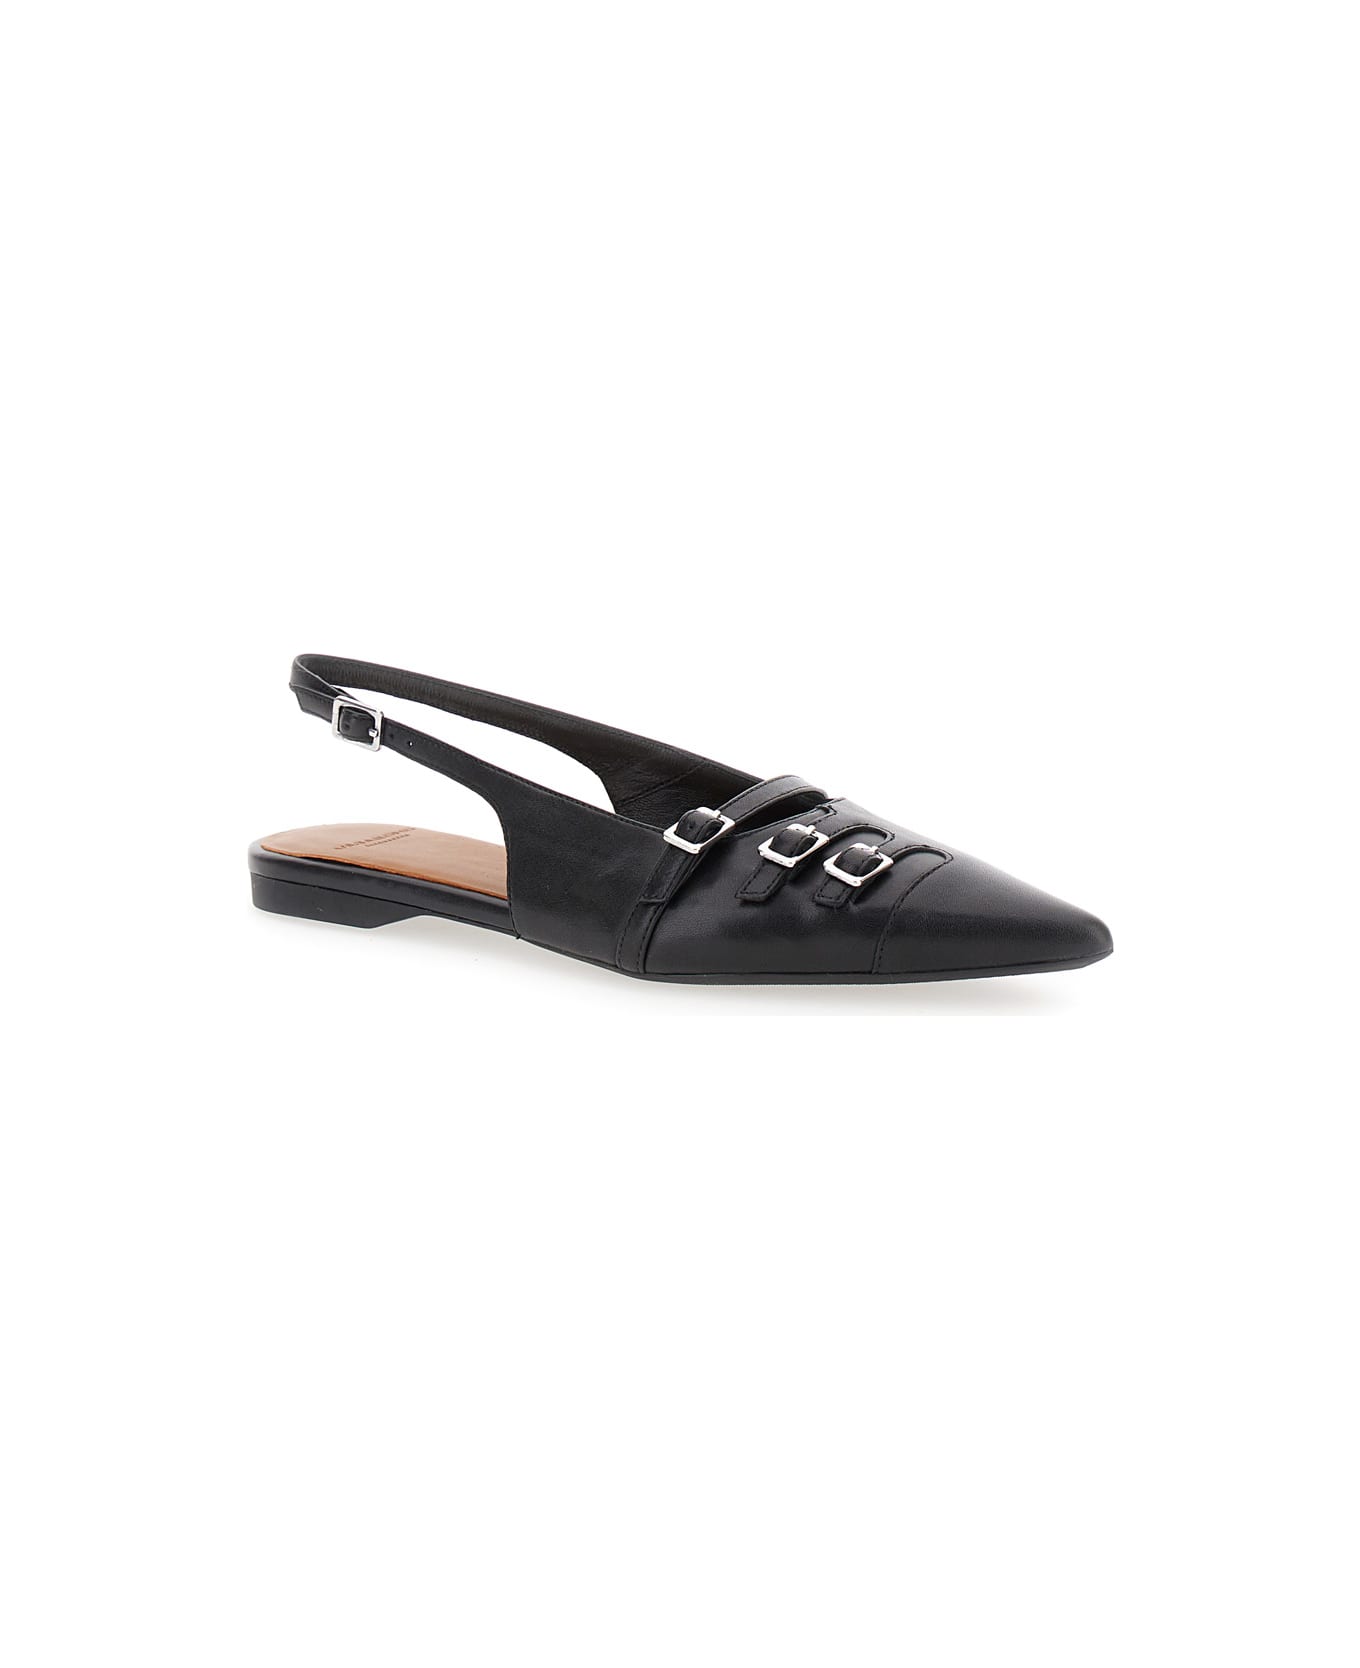 Vagabond 'hermine' Black Slingback Ballet Flats With Decorative Buckles In Leather Woman - Black フラットシューズ